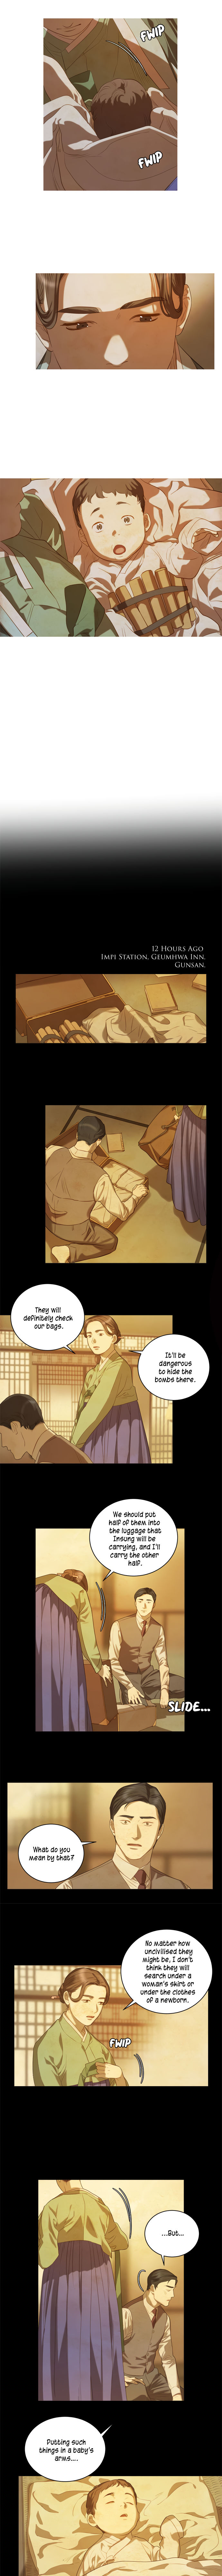 The Whale Star - The Gyeongseong Mermaid - Chapter 9 Page 6